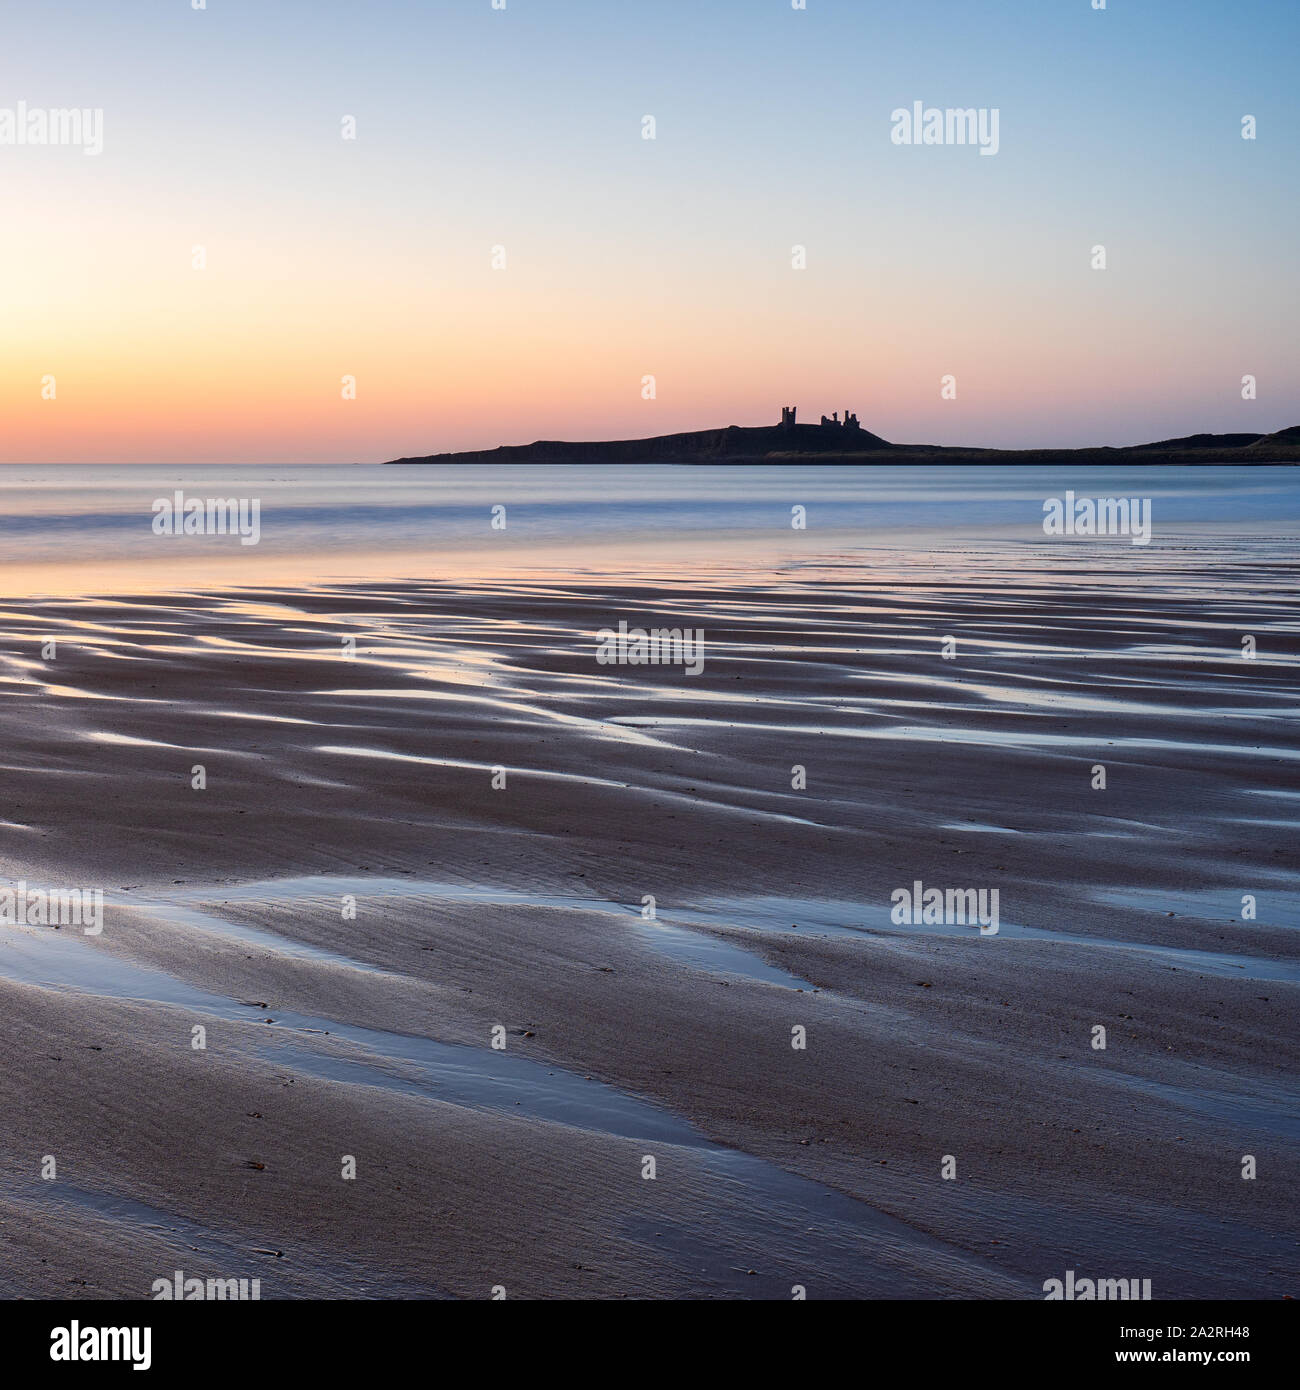 Beautiful patterns in the sand at Embleton Bay reflect the pre-sunrise sky with the imposing ruins of Dunstanburgh Castle on the horizon. Stock Photo